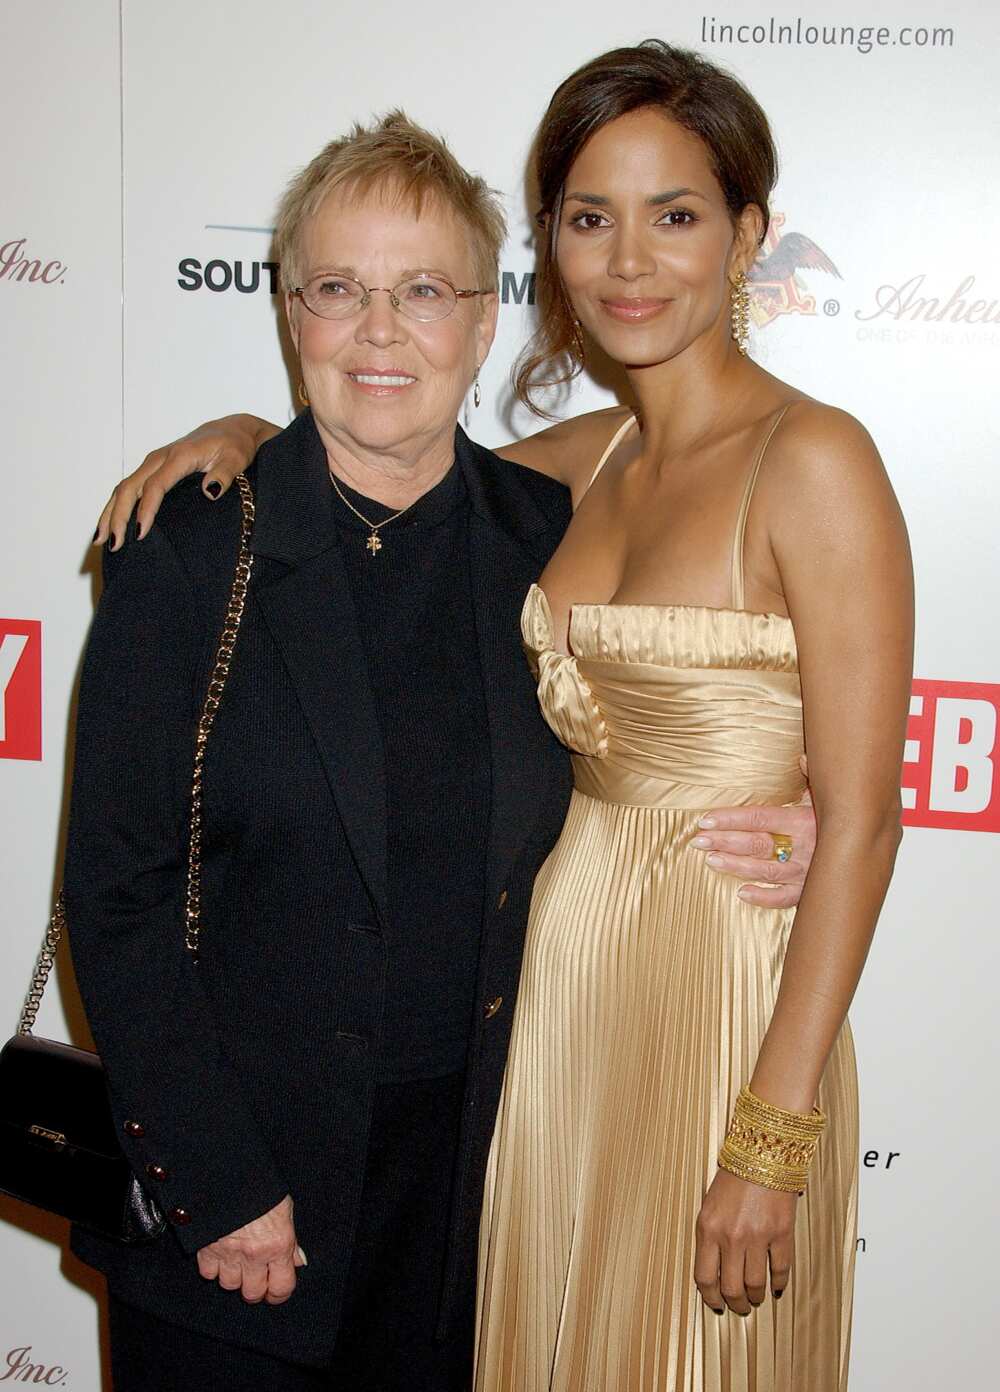 Does Halle Berry have a relationship with her father?